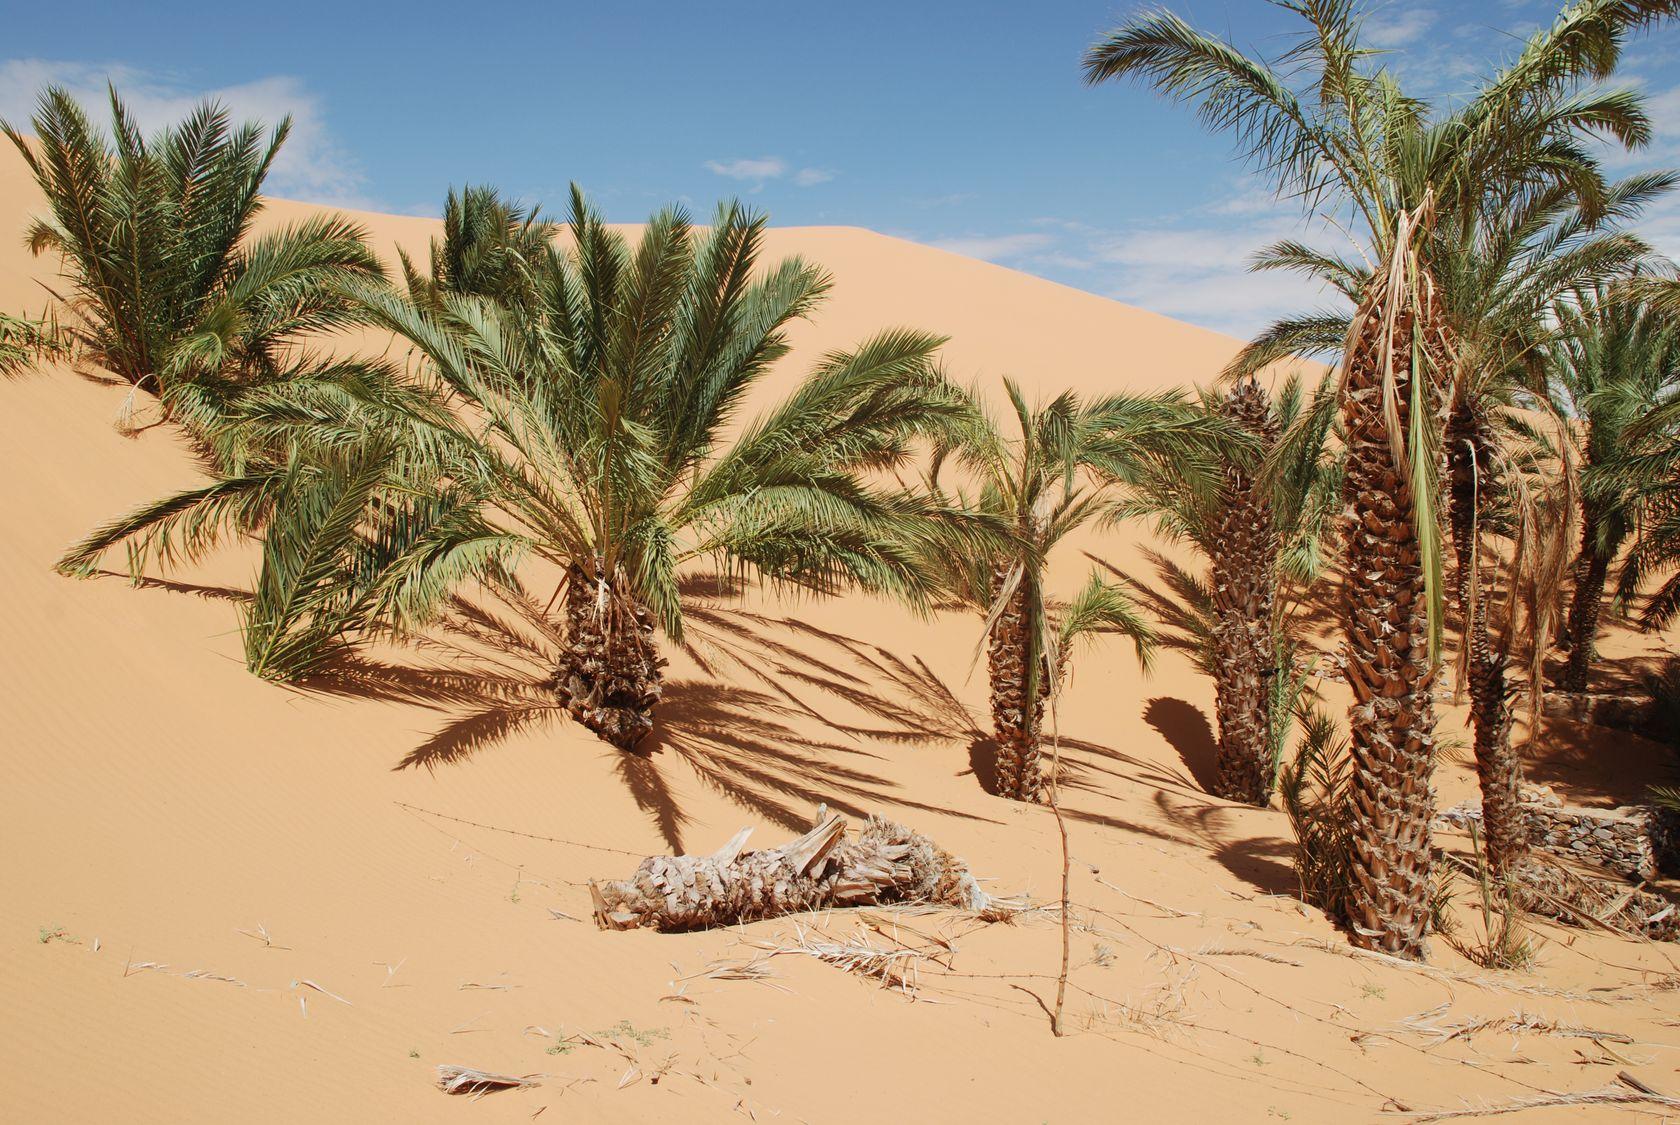 Trees nearly swallowed up by sand dunes in Chinguetti, Mauritania